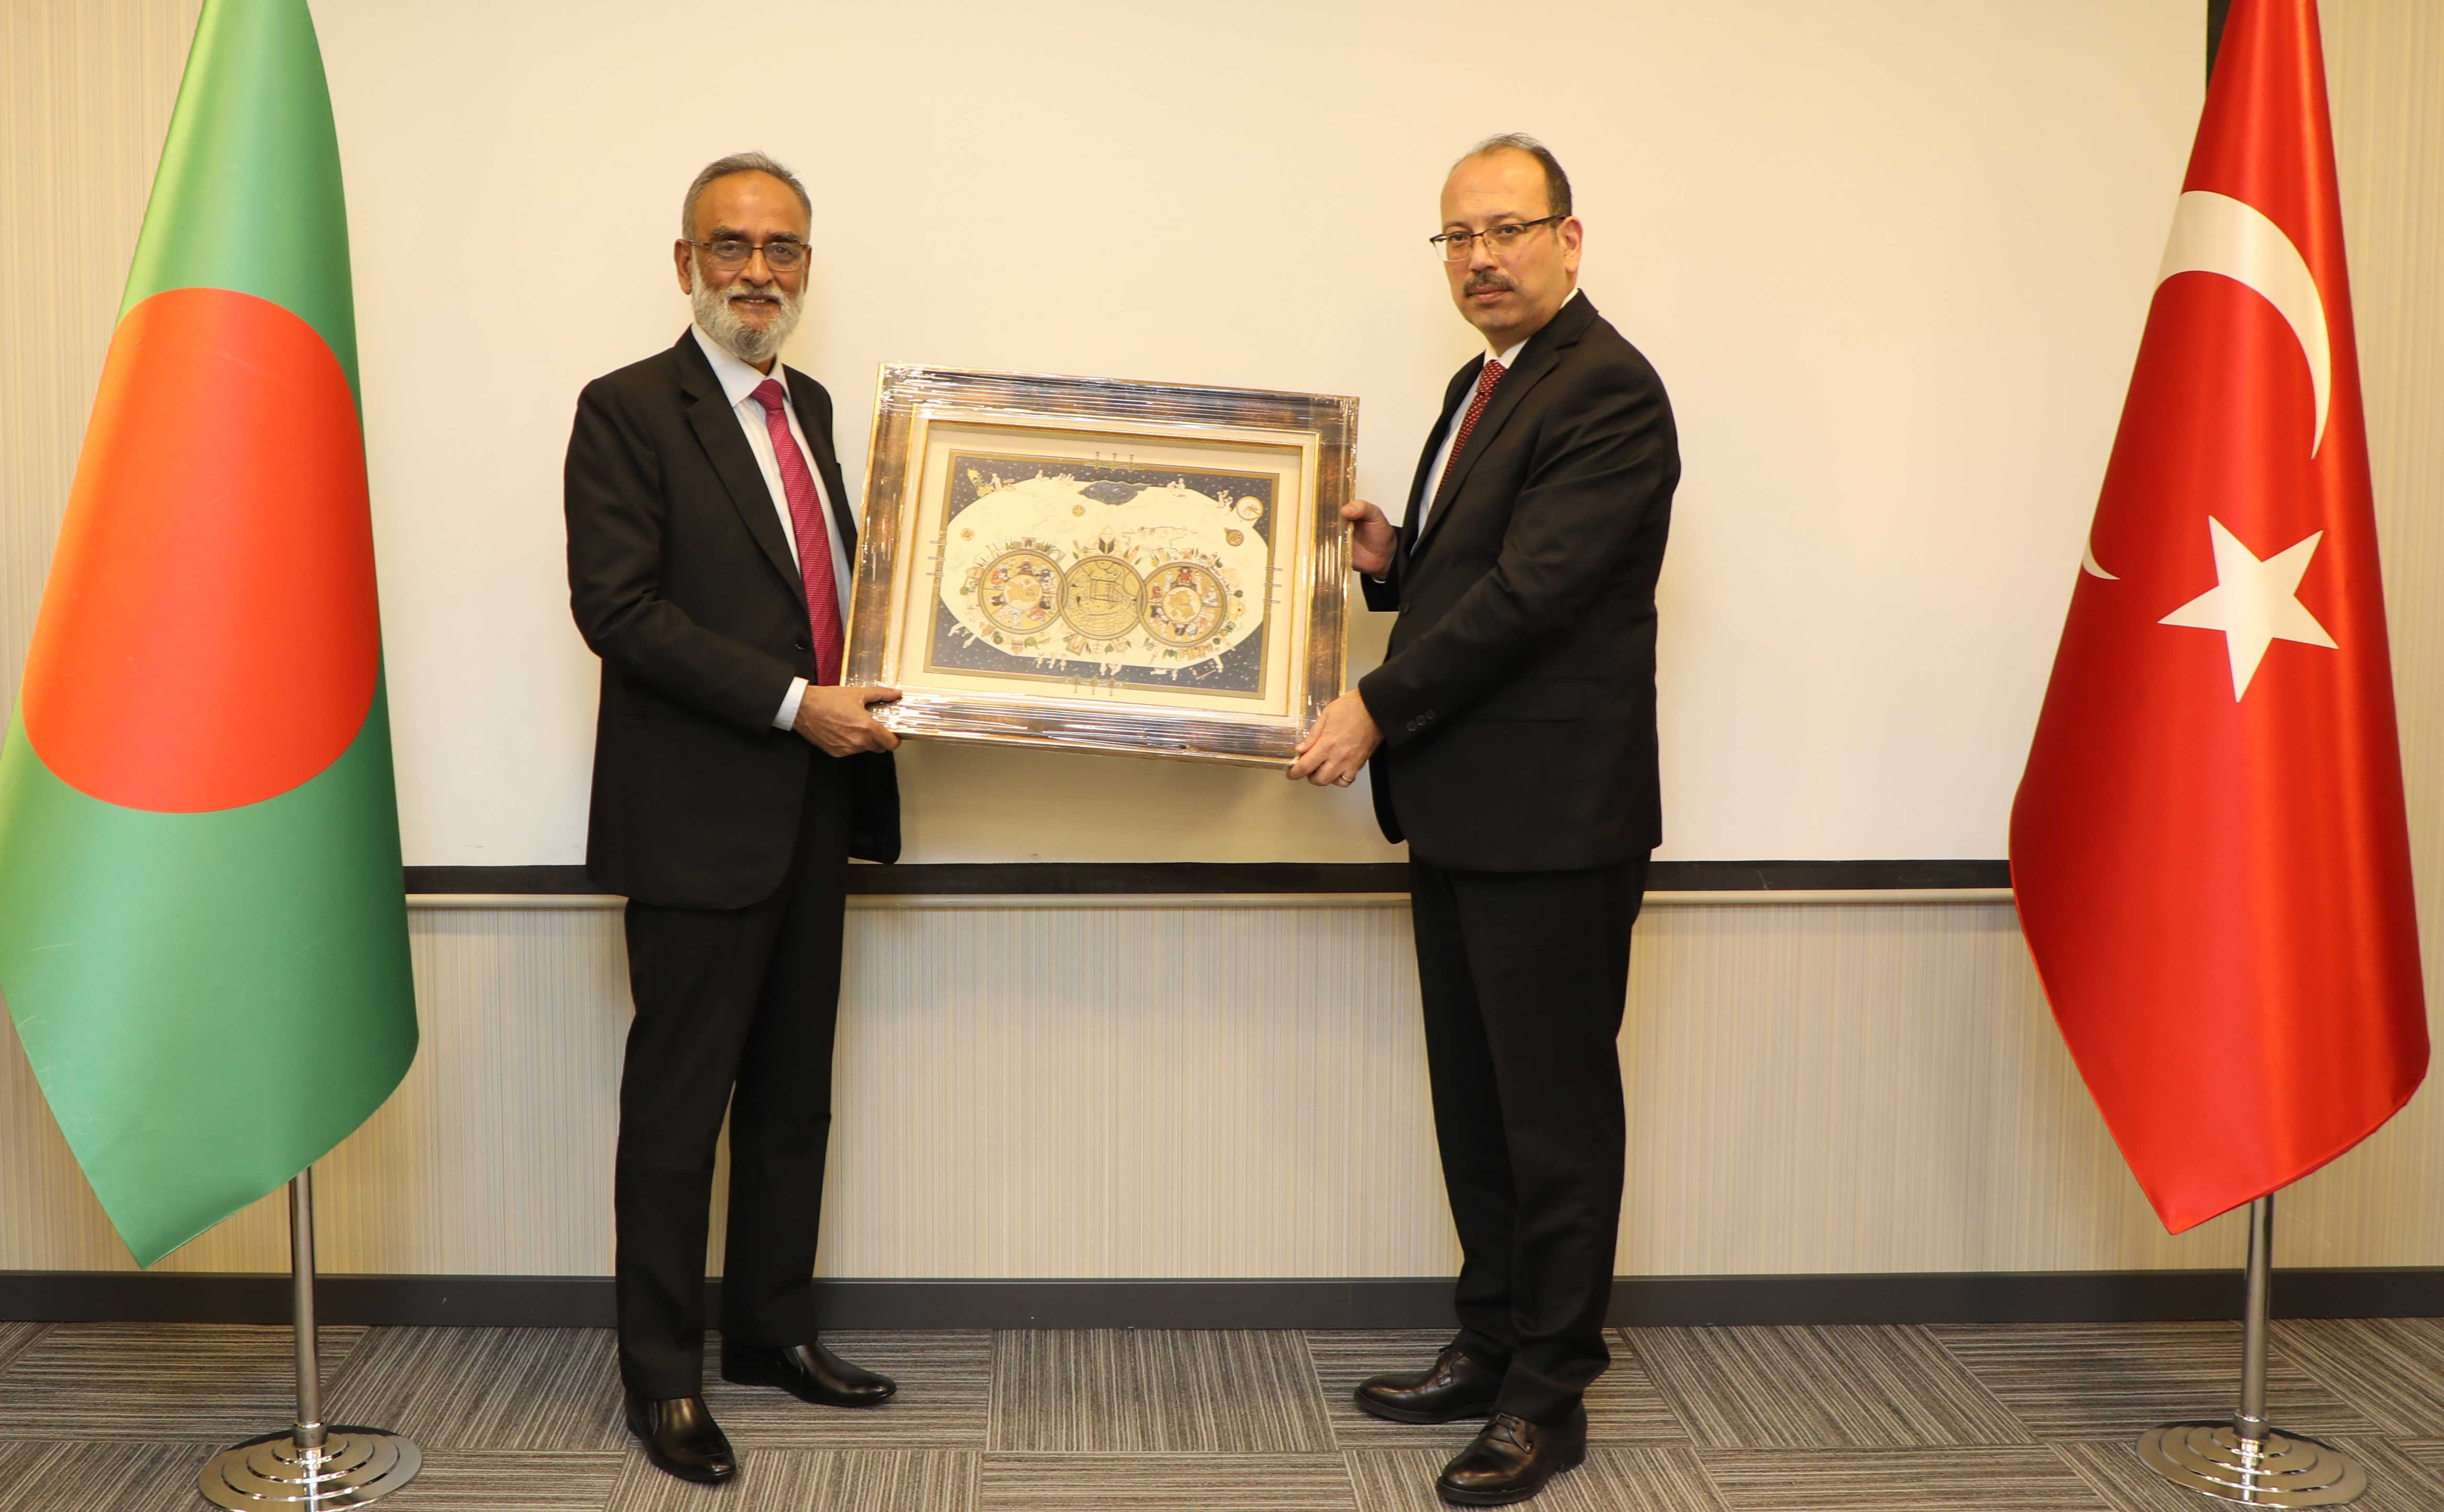 Honorable CAG of Bangladesh, Mr. Mohammad Muslim Chowdhury receives a souvenir from President, Turkish Court of Accounts, Mr. Metin Yener after MoU signing ceremony in Ankara, Turkey